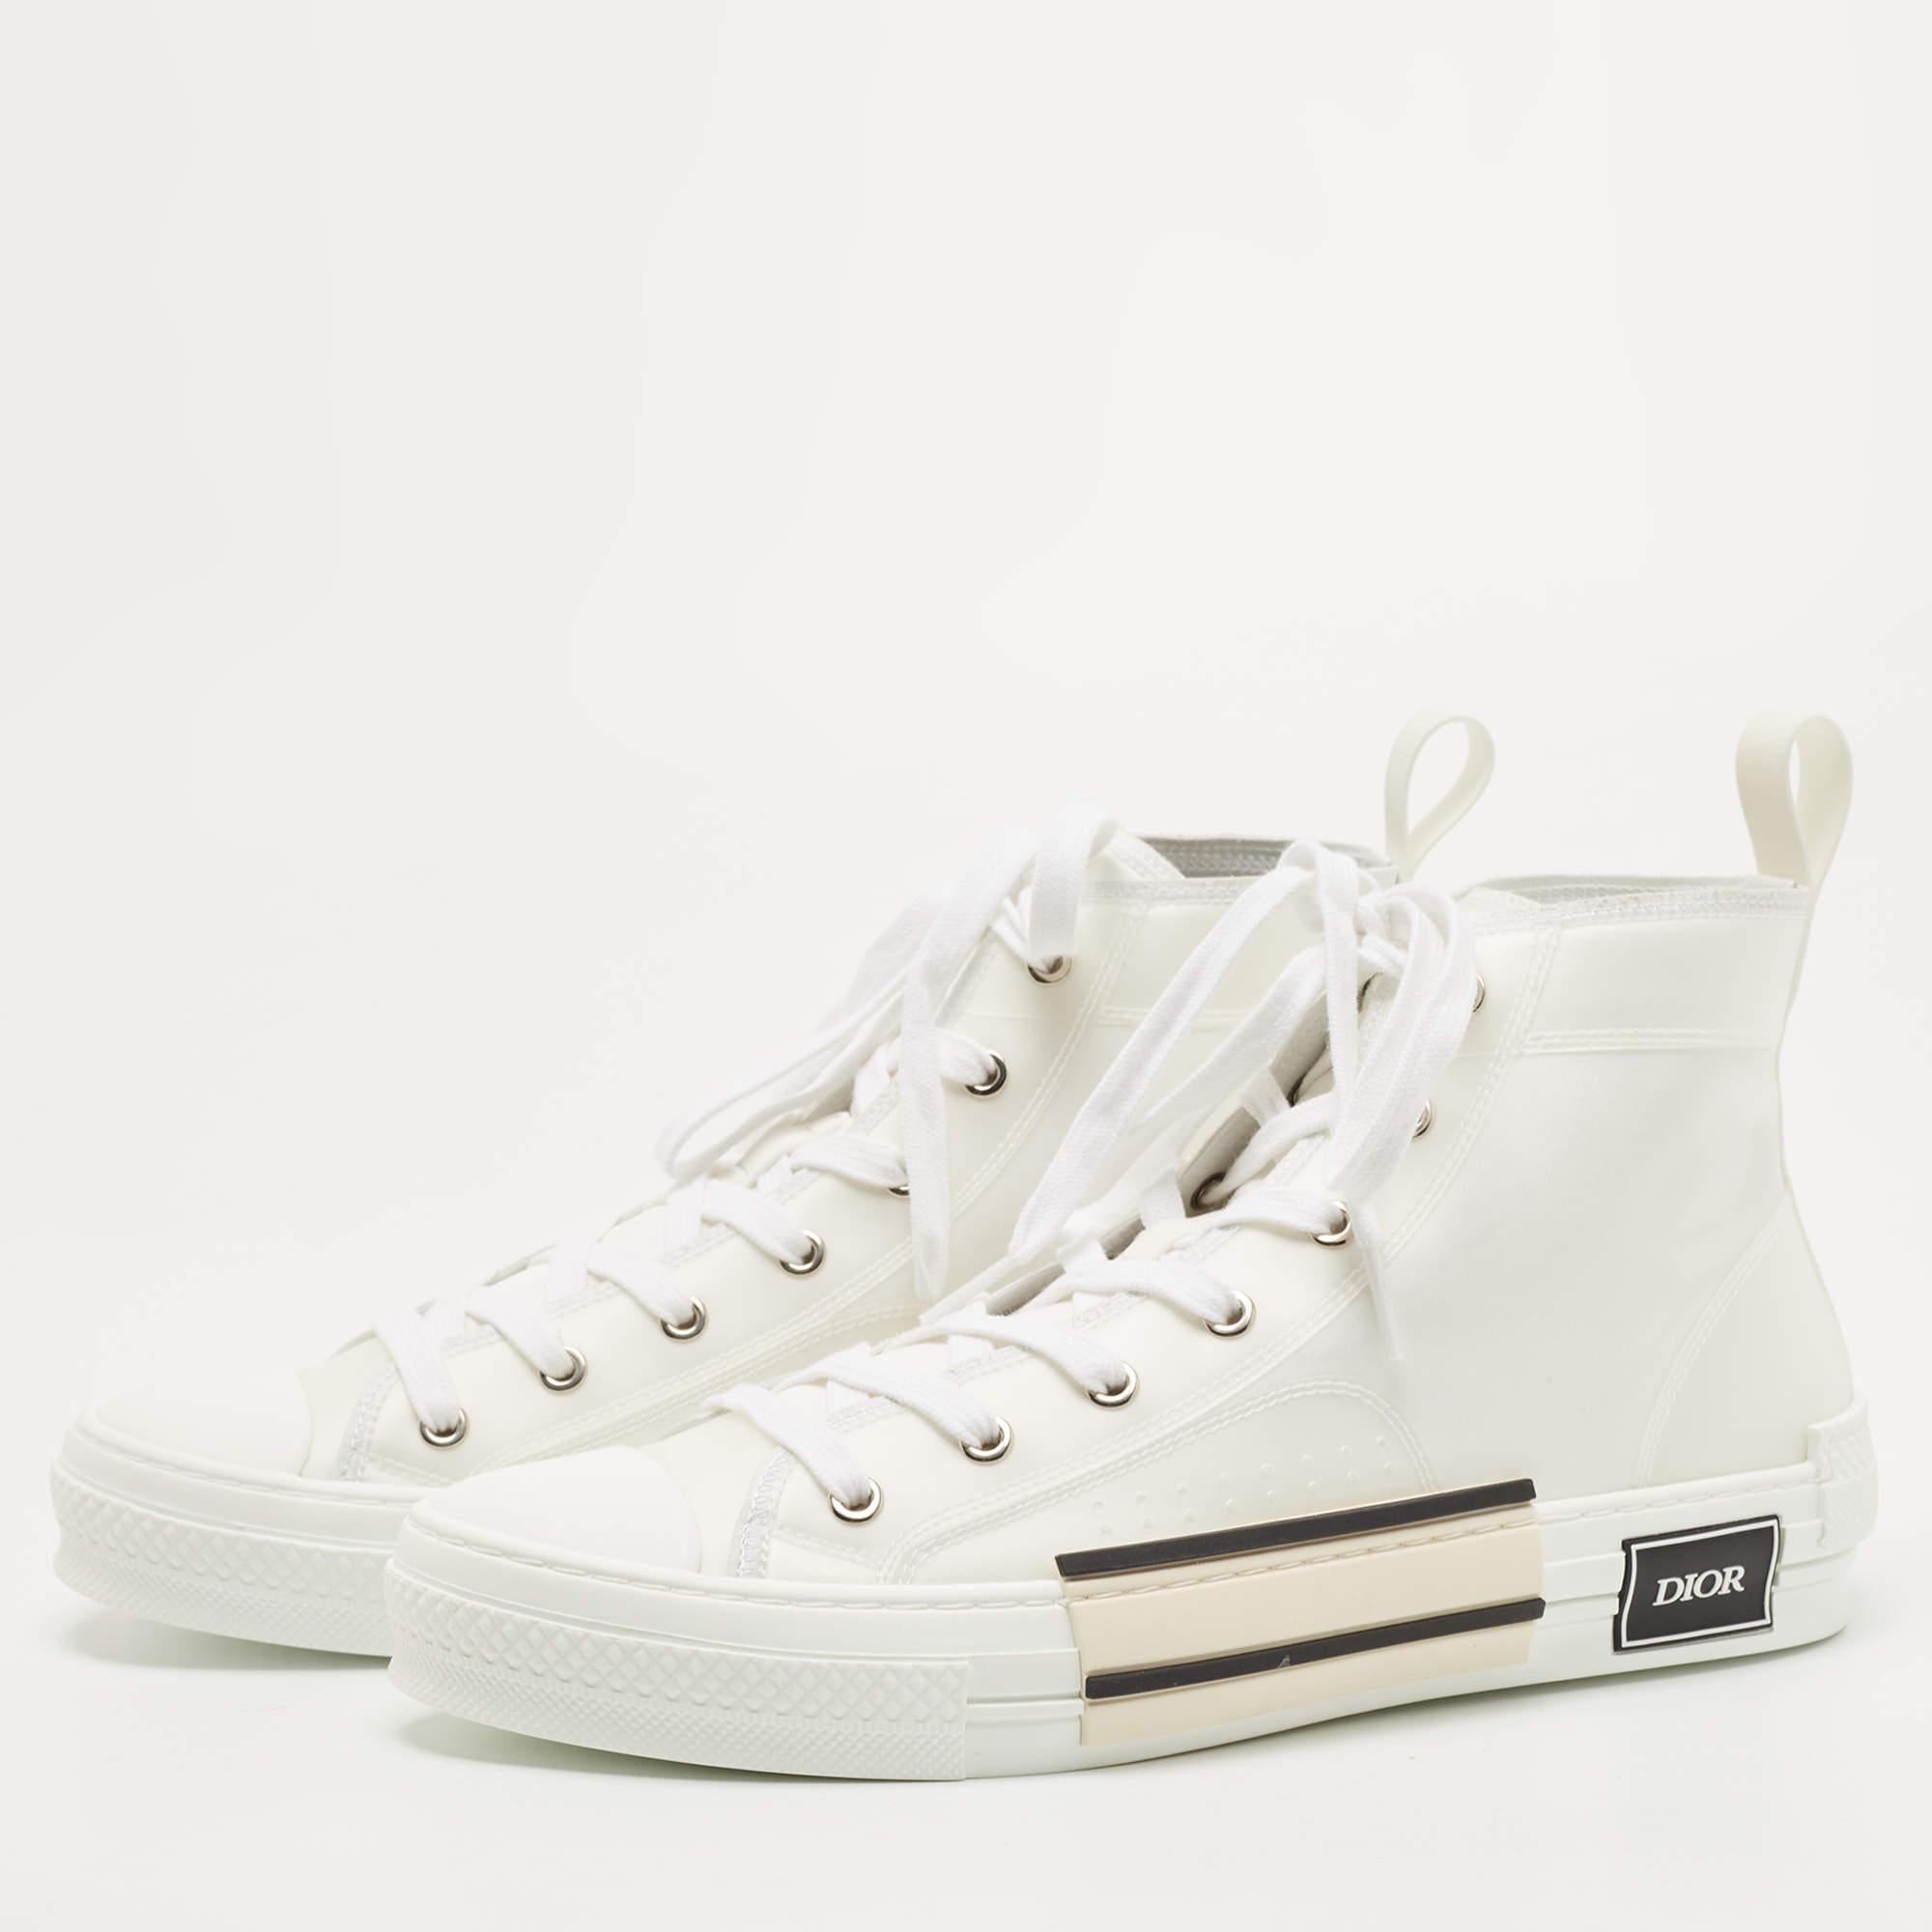 Men's Dior White Canvas and PVC B23 High Top Sneakers Size 42